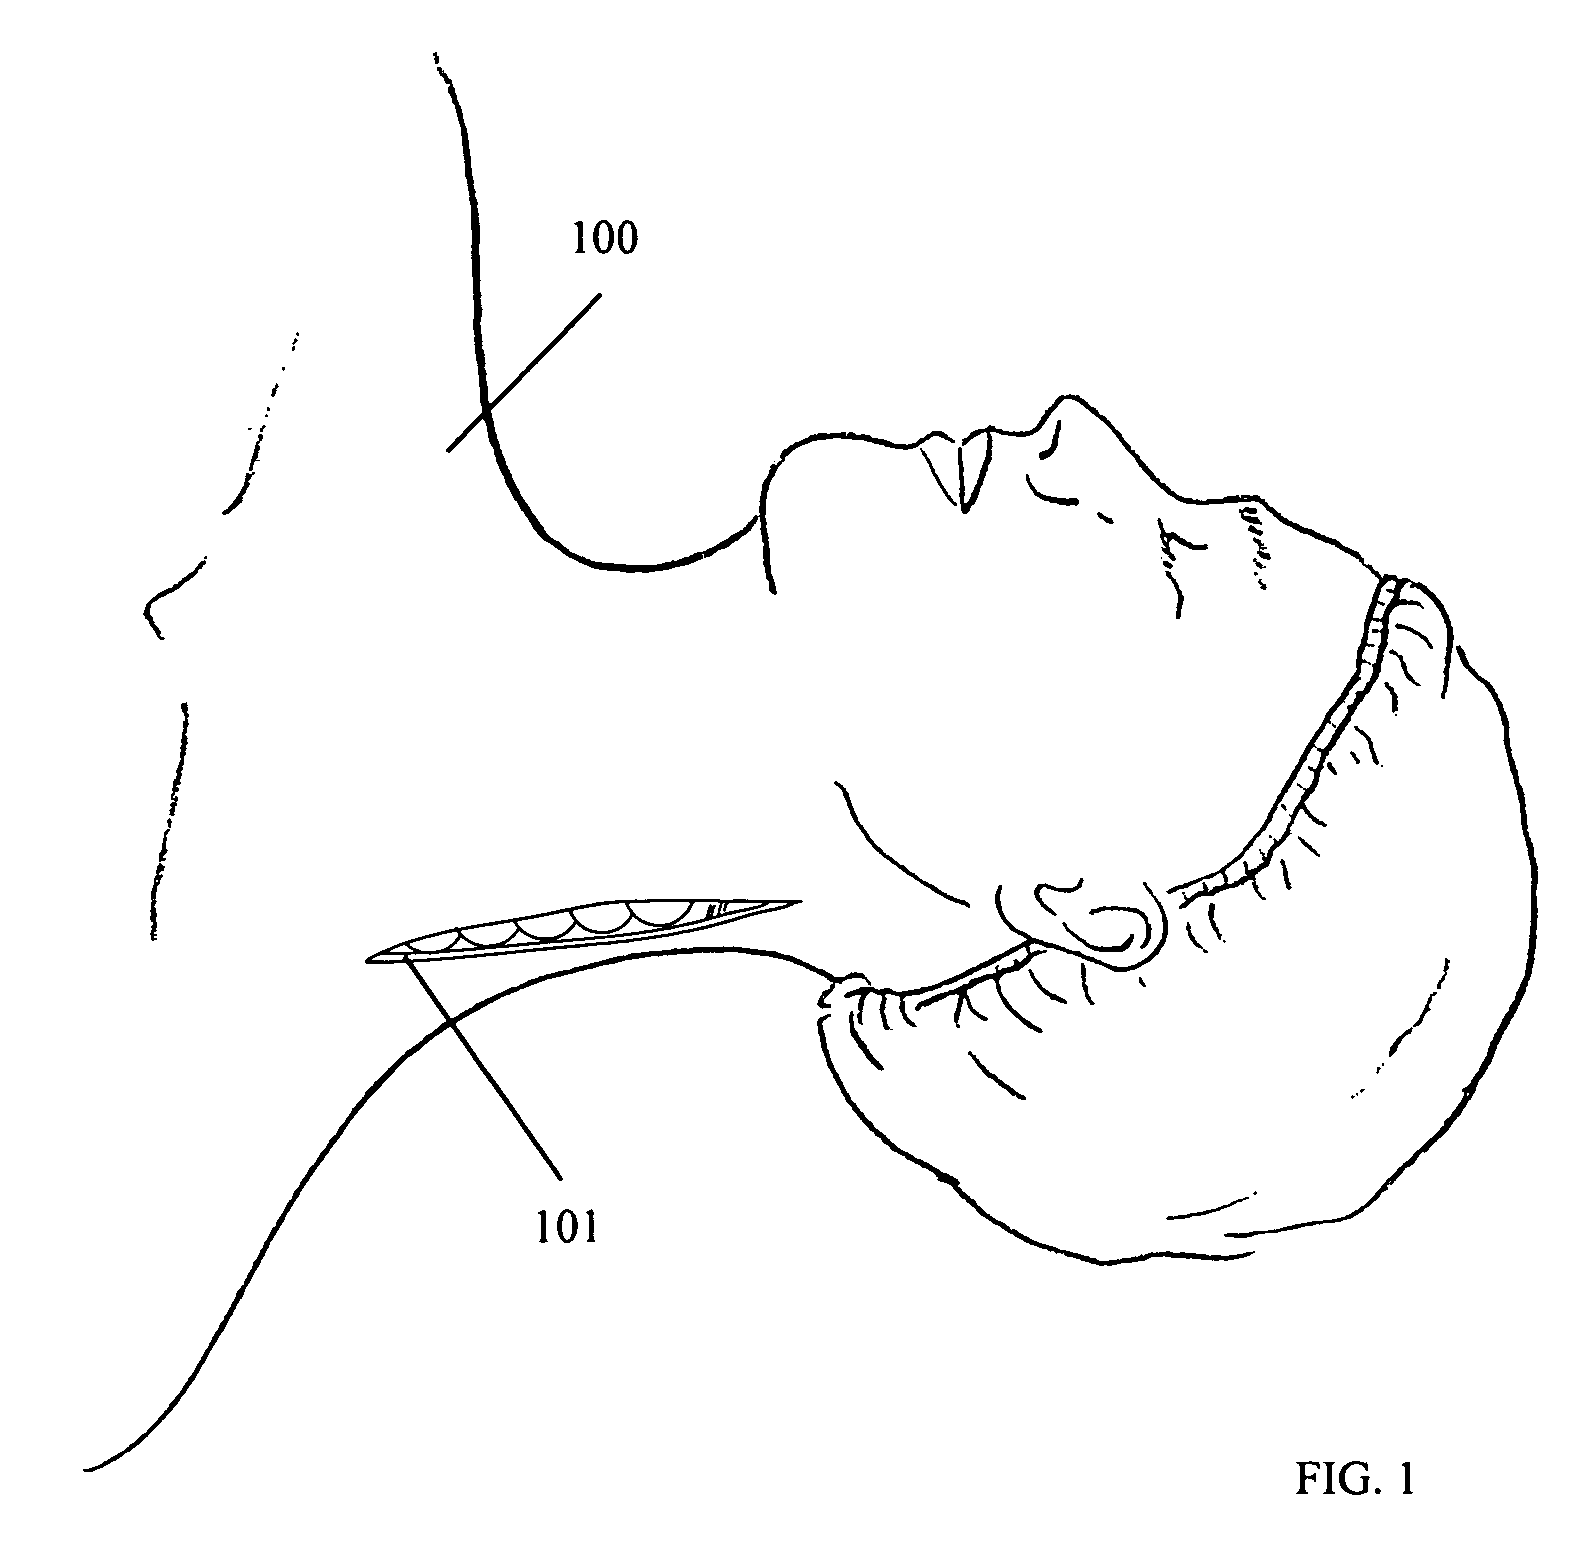 Method of lateral facet approach, decompression and fusion using screws and staples as well as arthroplasty